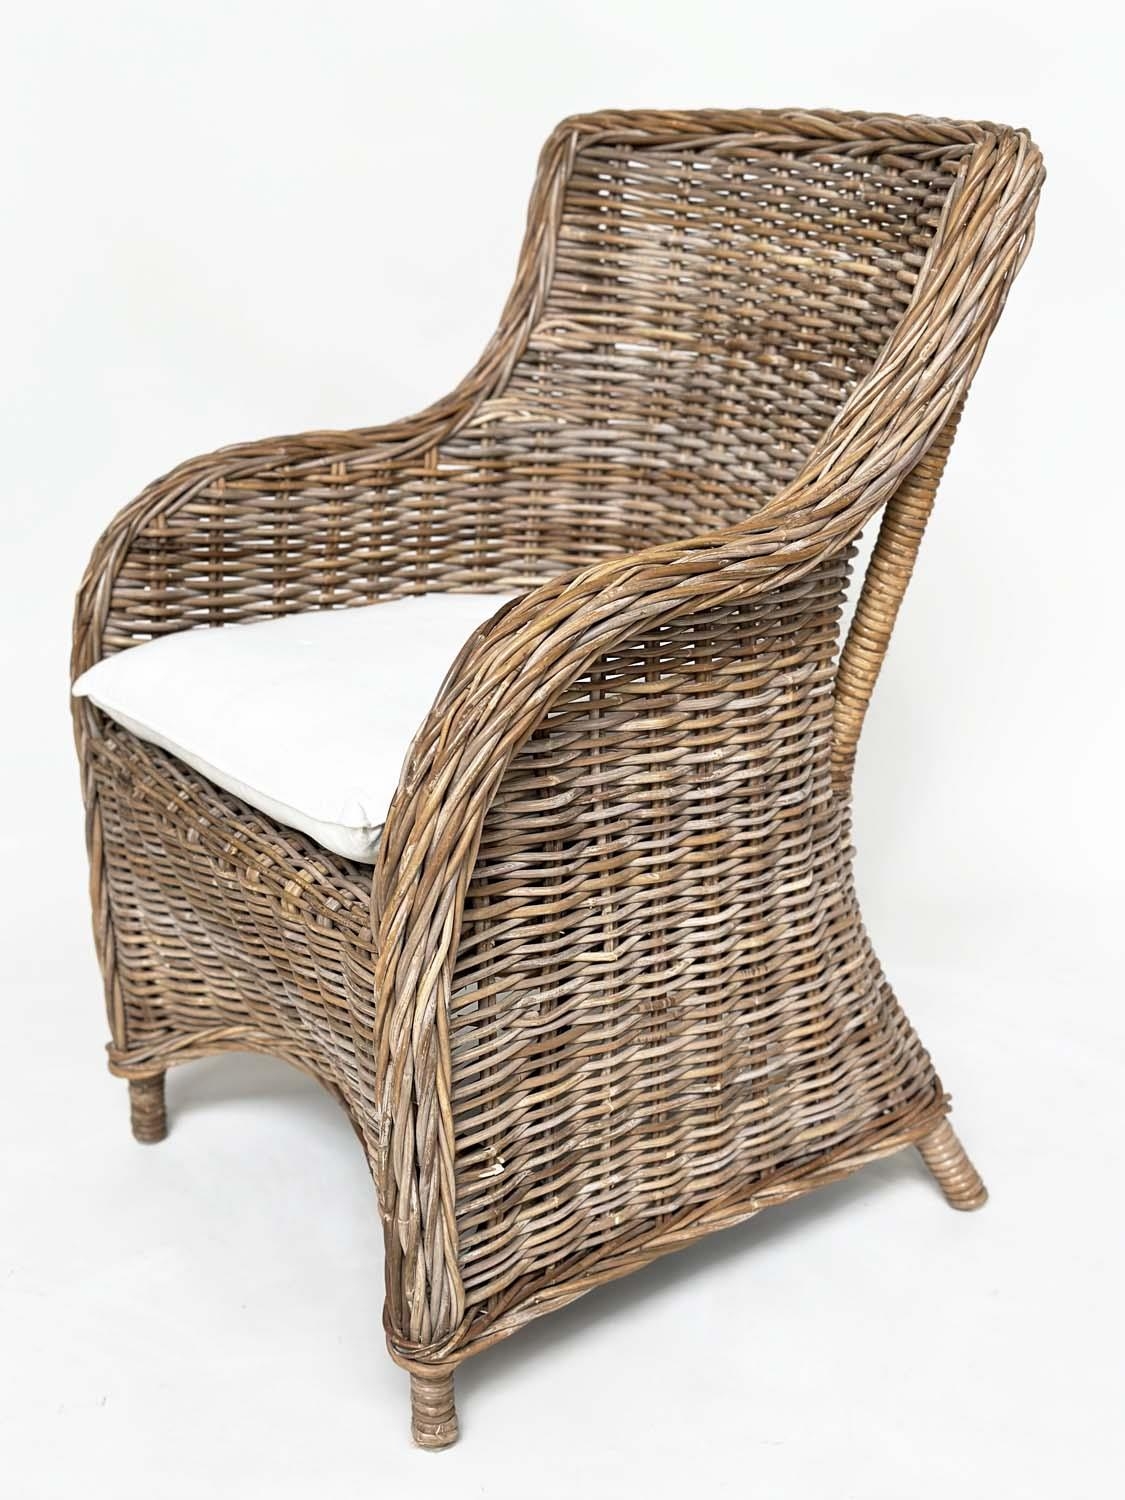 ORANGERY ARMCHAIRS, a pair, rattan framed and woven with cushion seats. (2) - Image 13 of 15